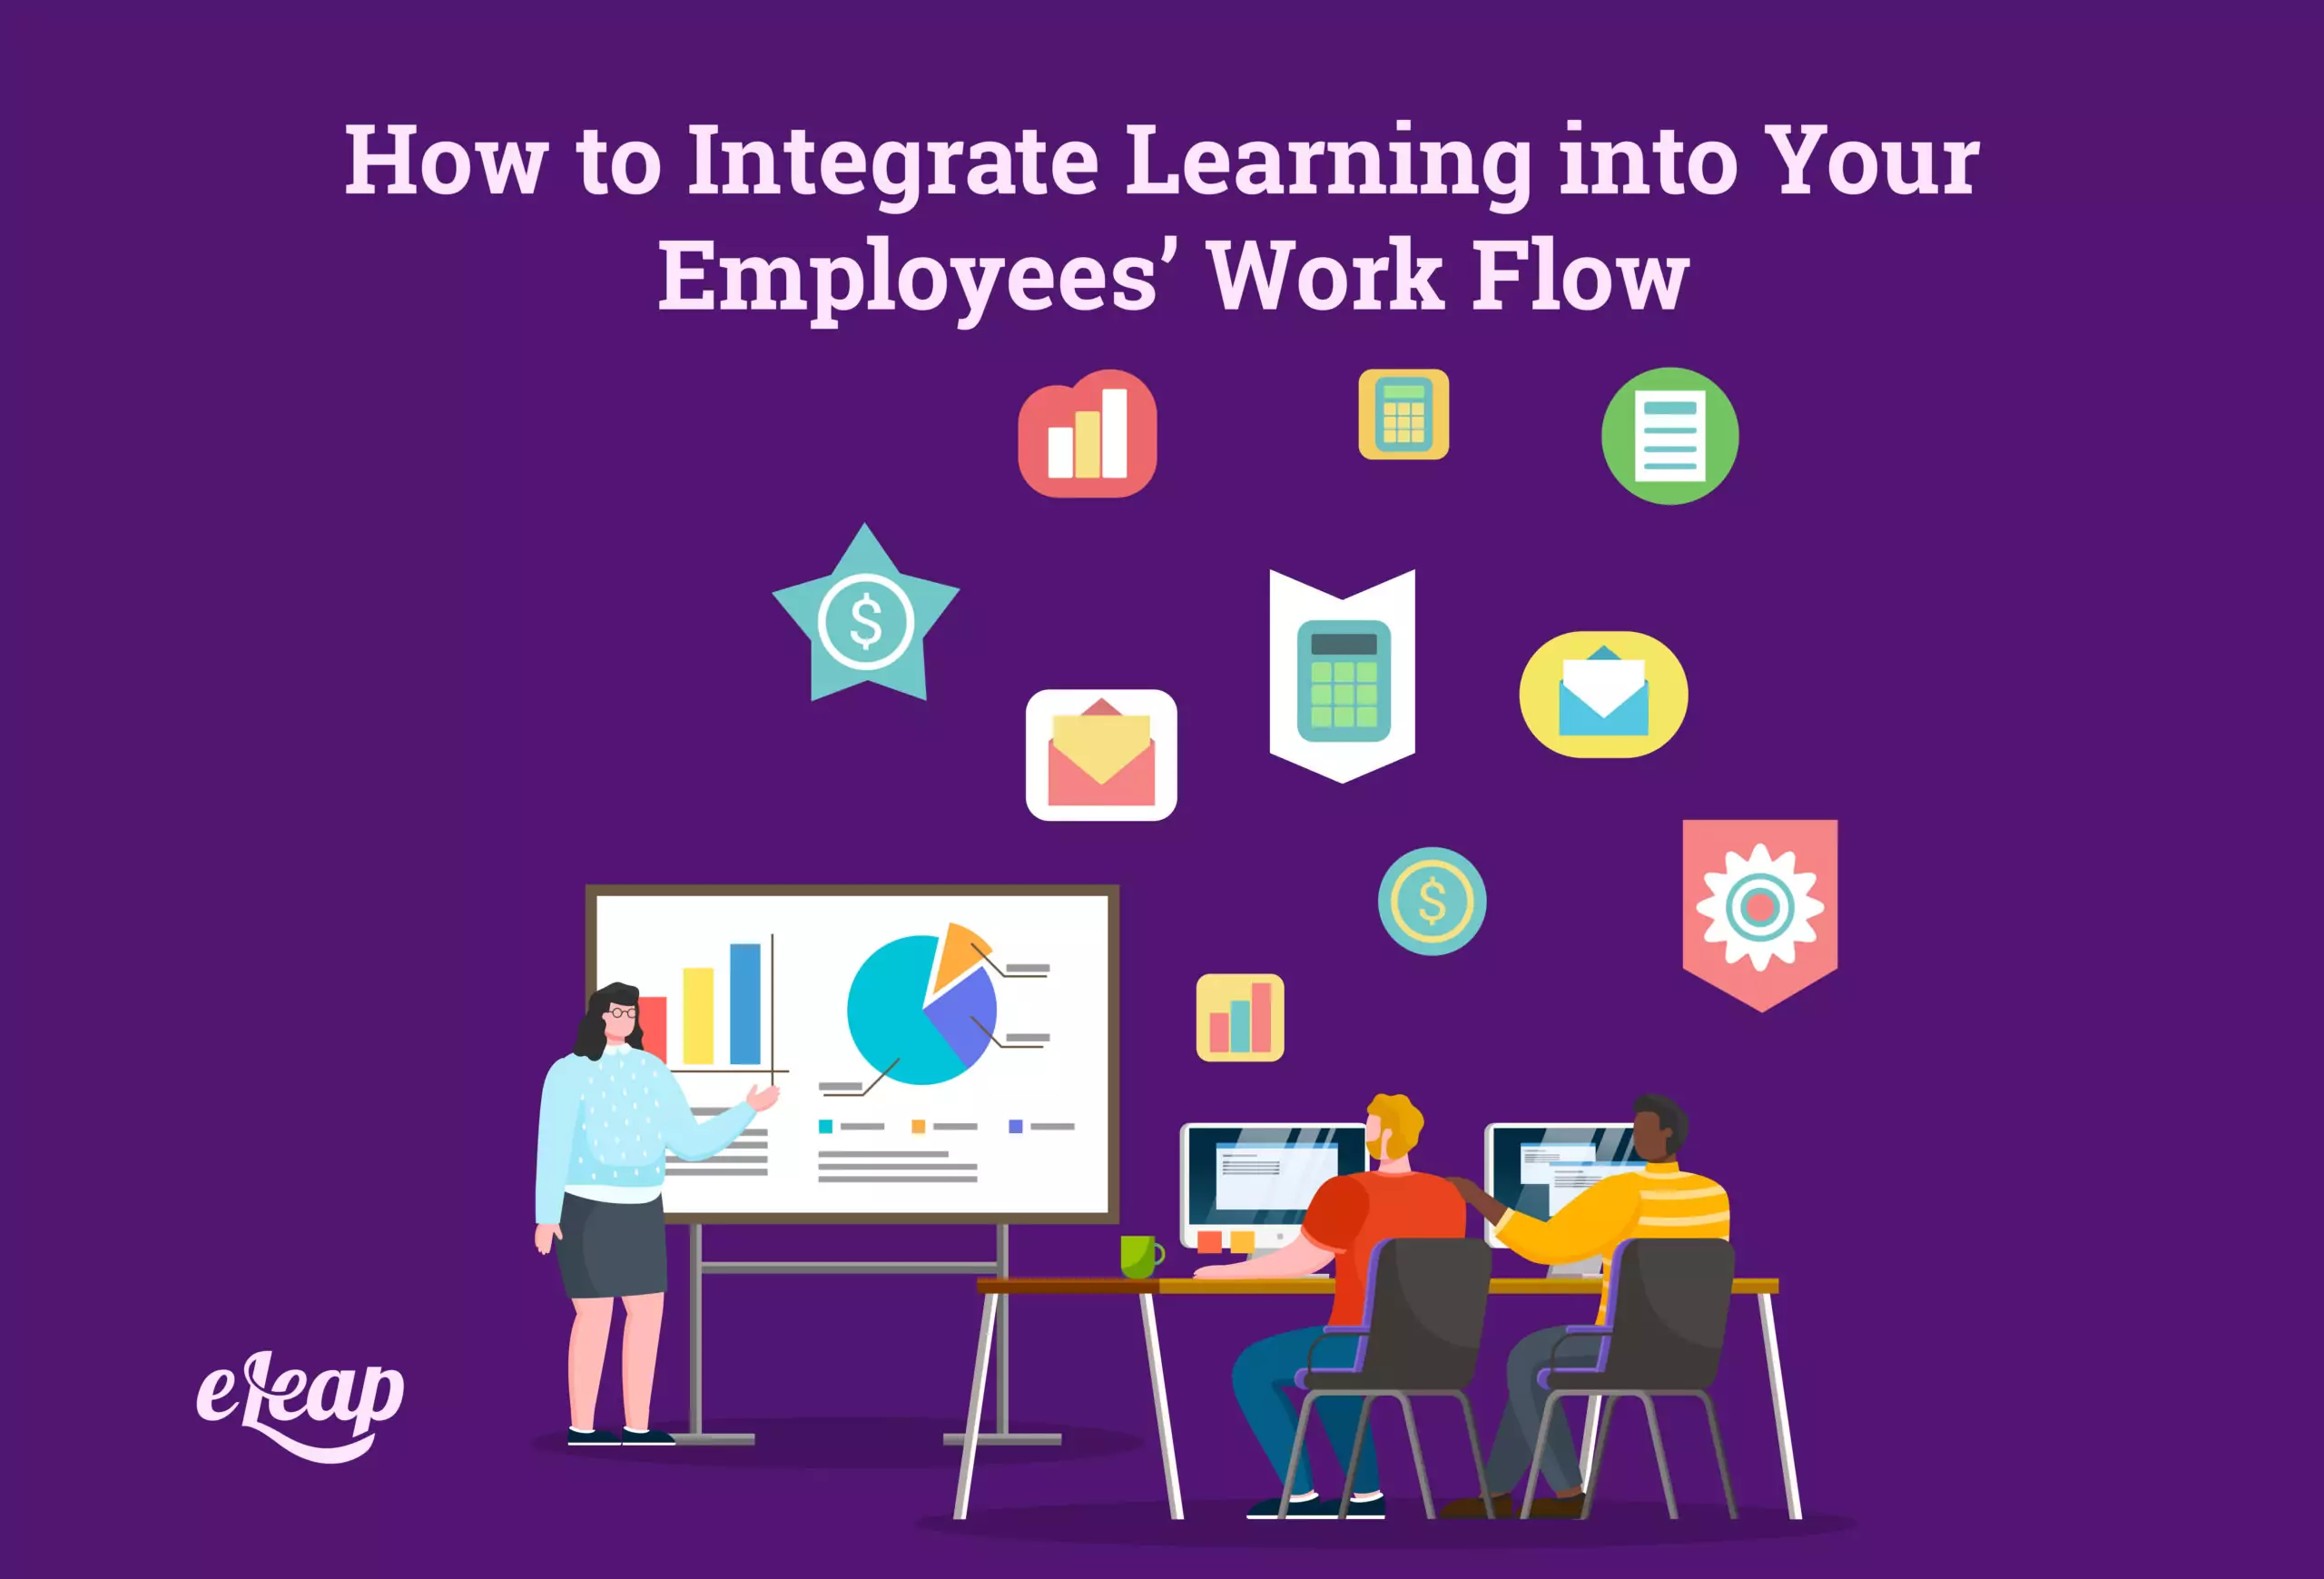 How to Integrate Learning into Your Employees’ Work Flow